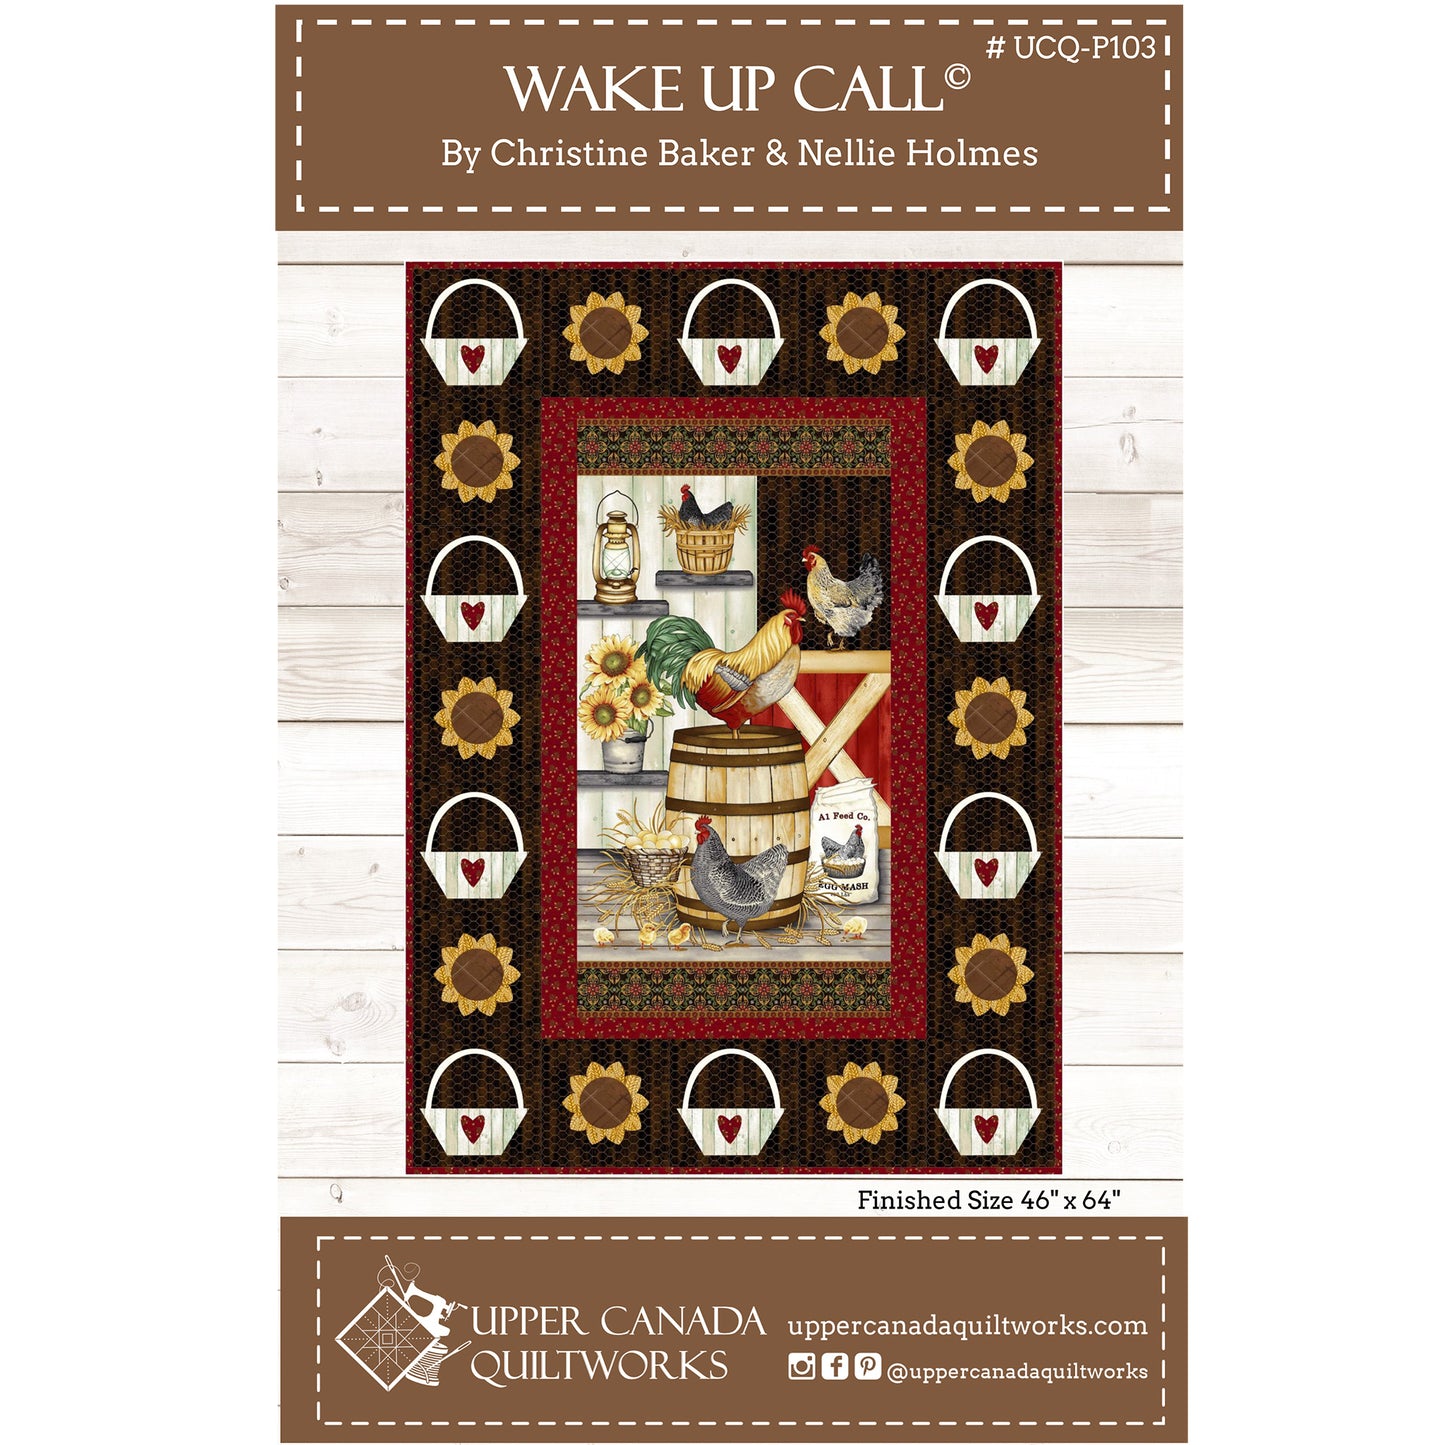 Cover image of pattern for Wake Up Call Quilt.